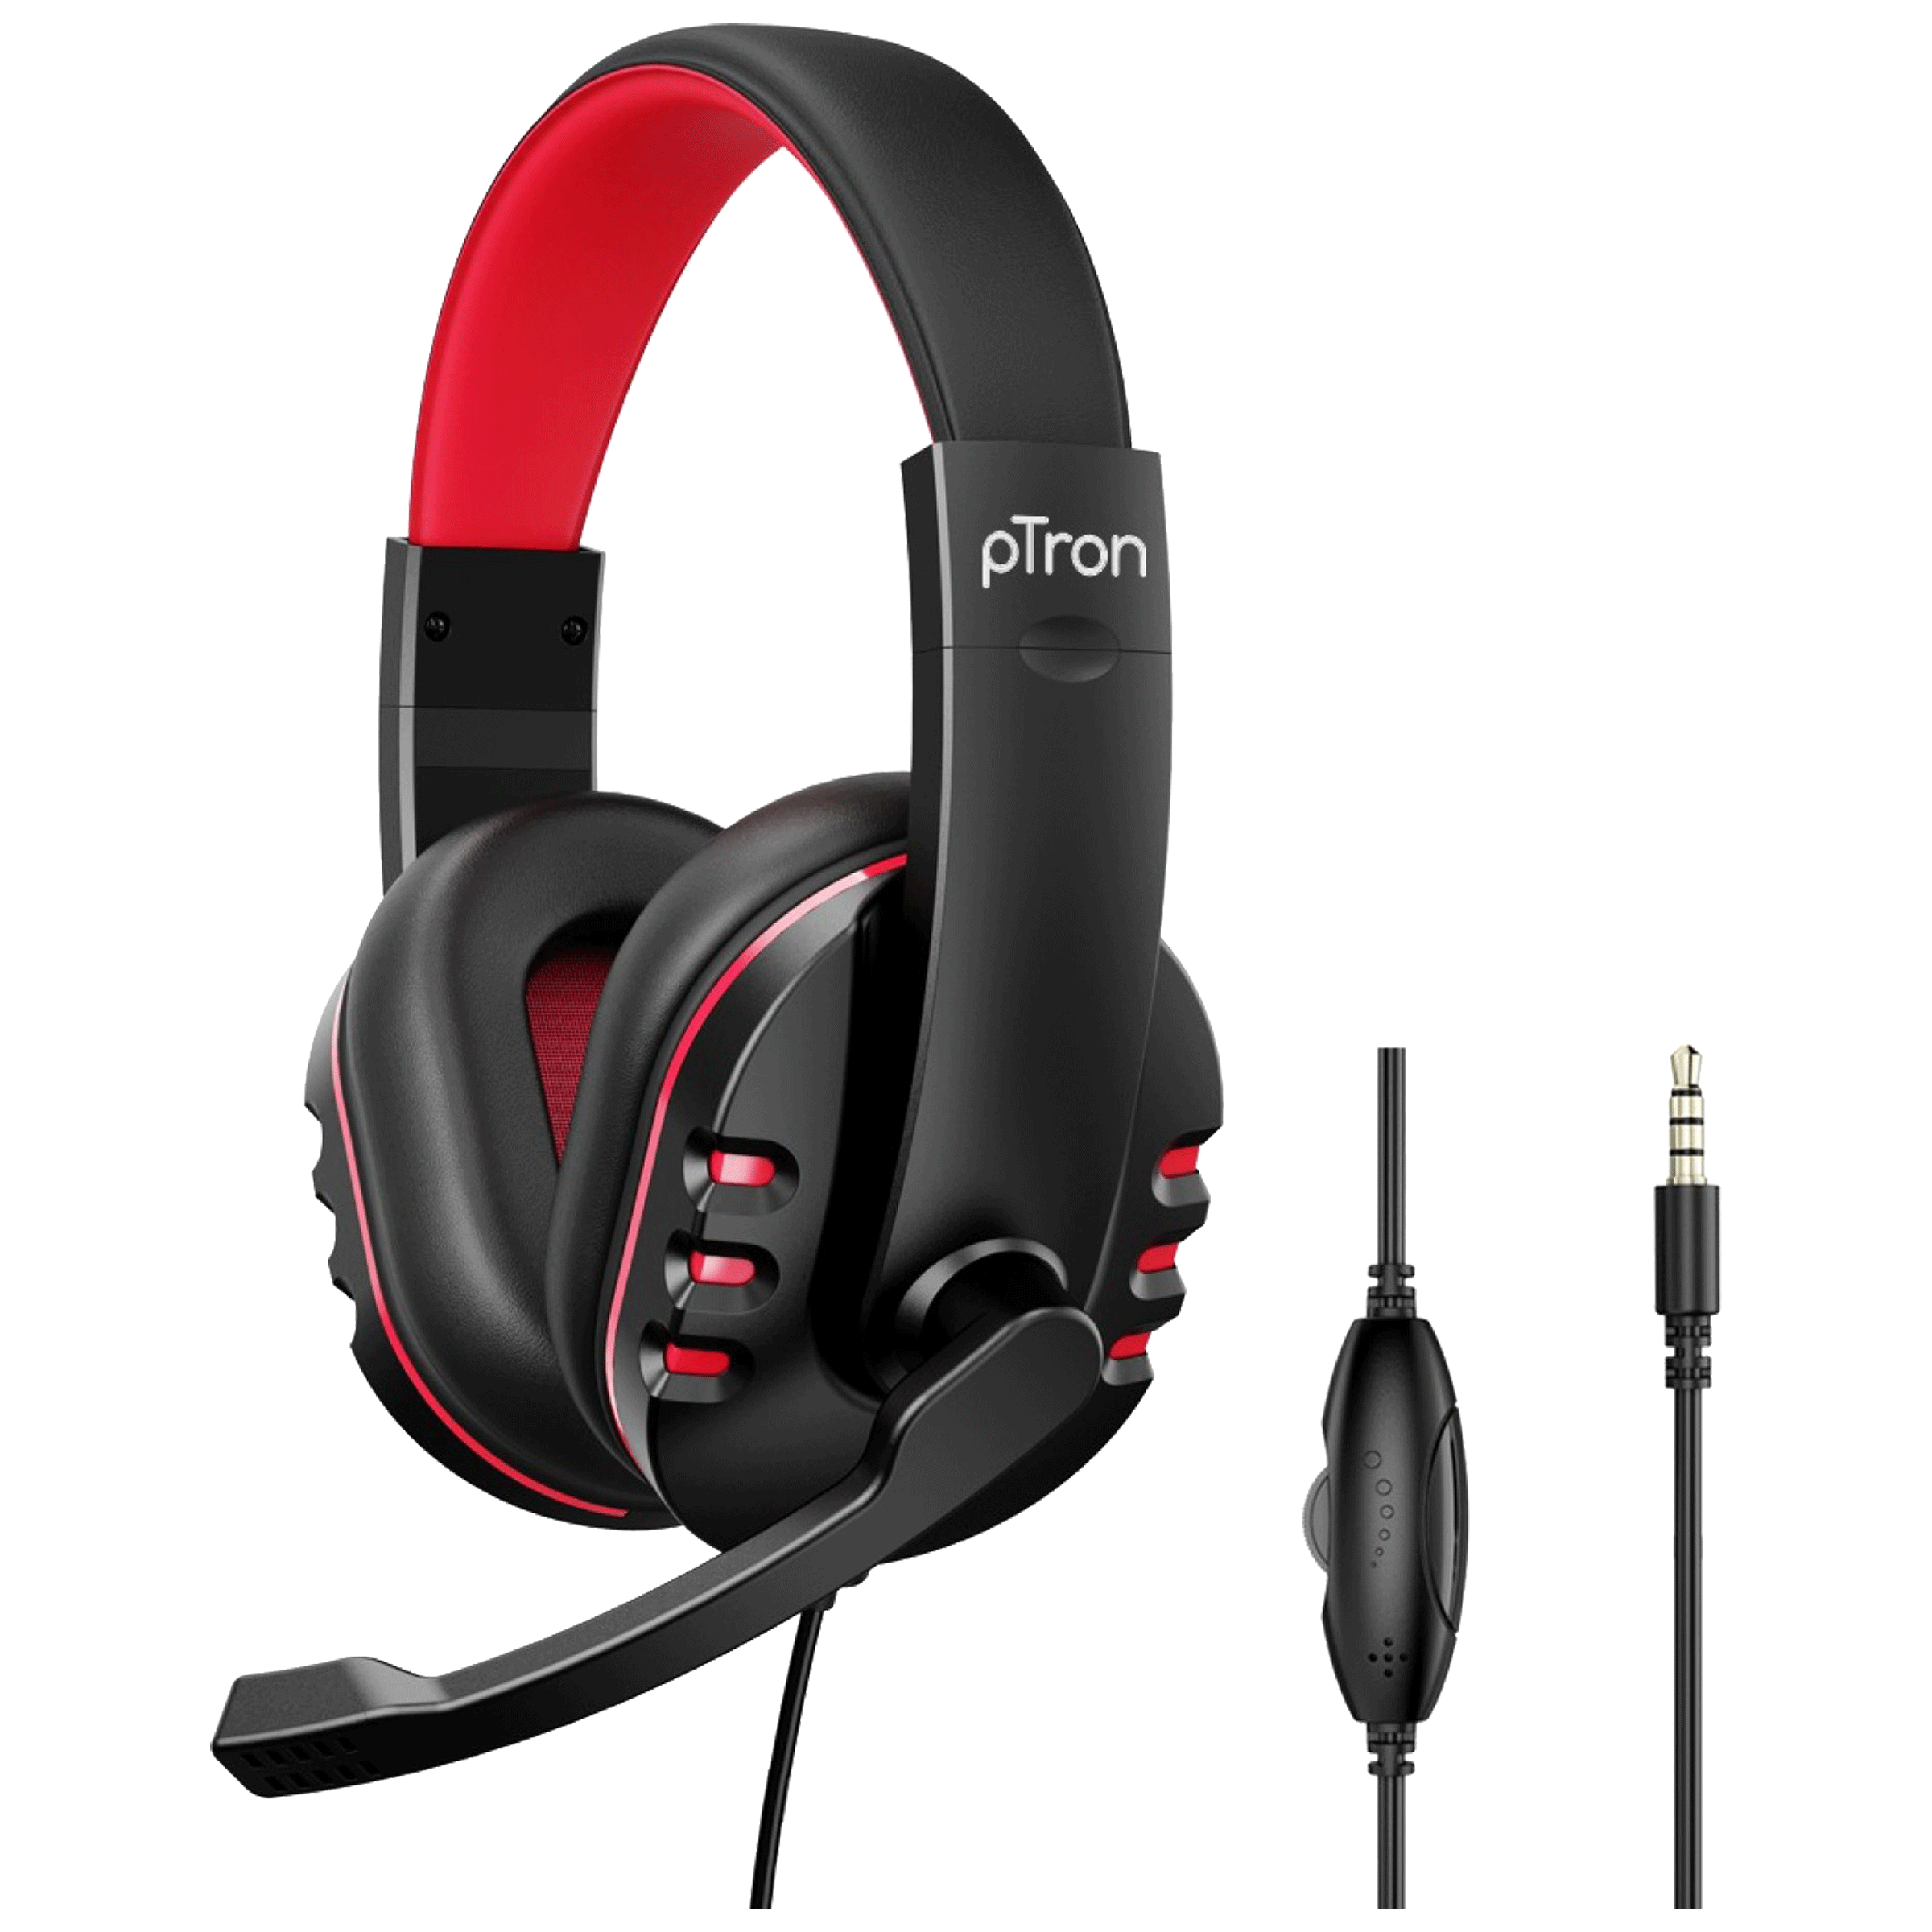 pTron Soundster Arcade 140317989 Over-Ear Wired Gaming Headphone with Mic (40mm Dynamic Driver, Black/Red)_4